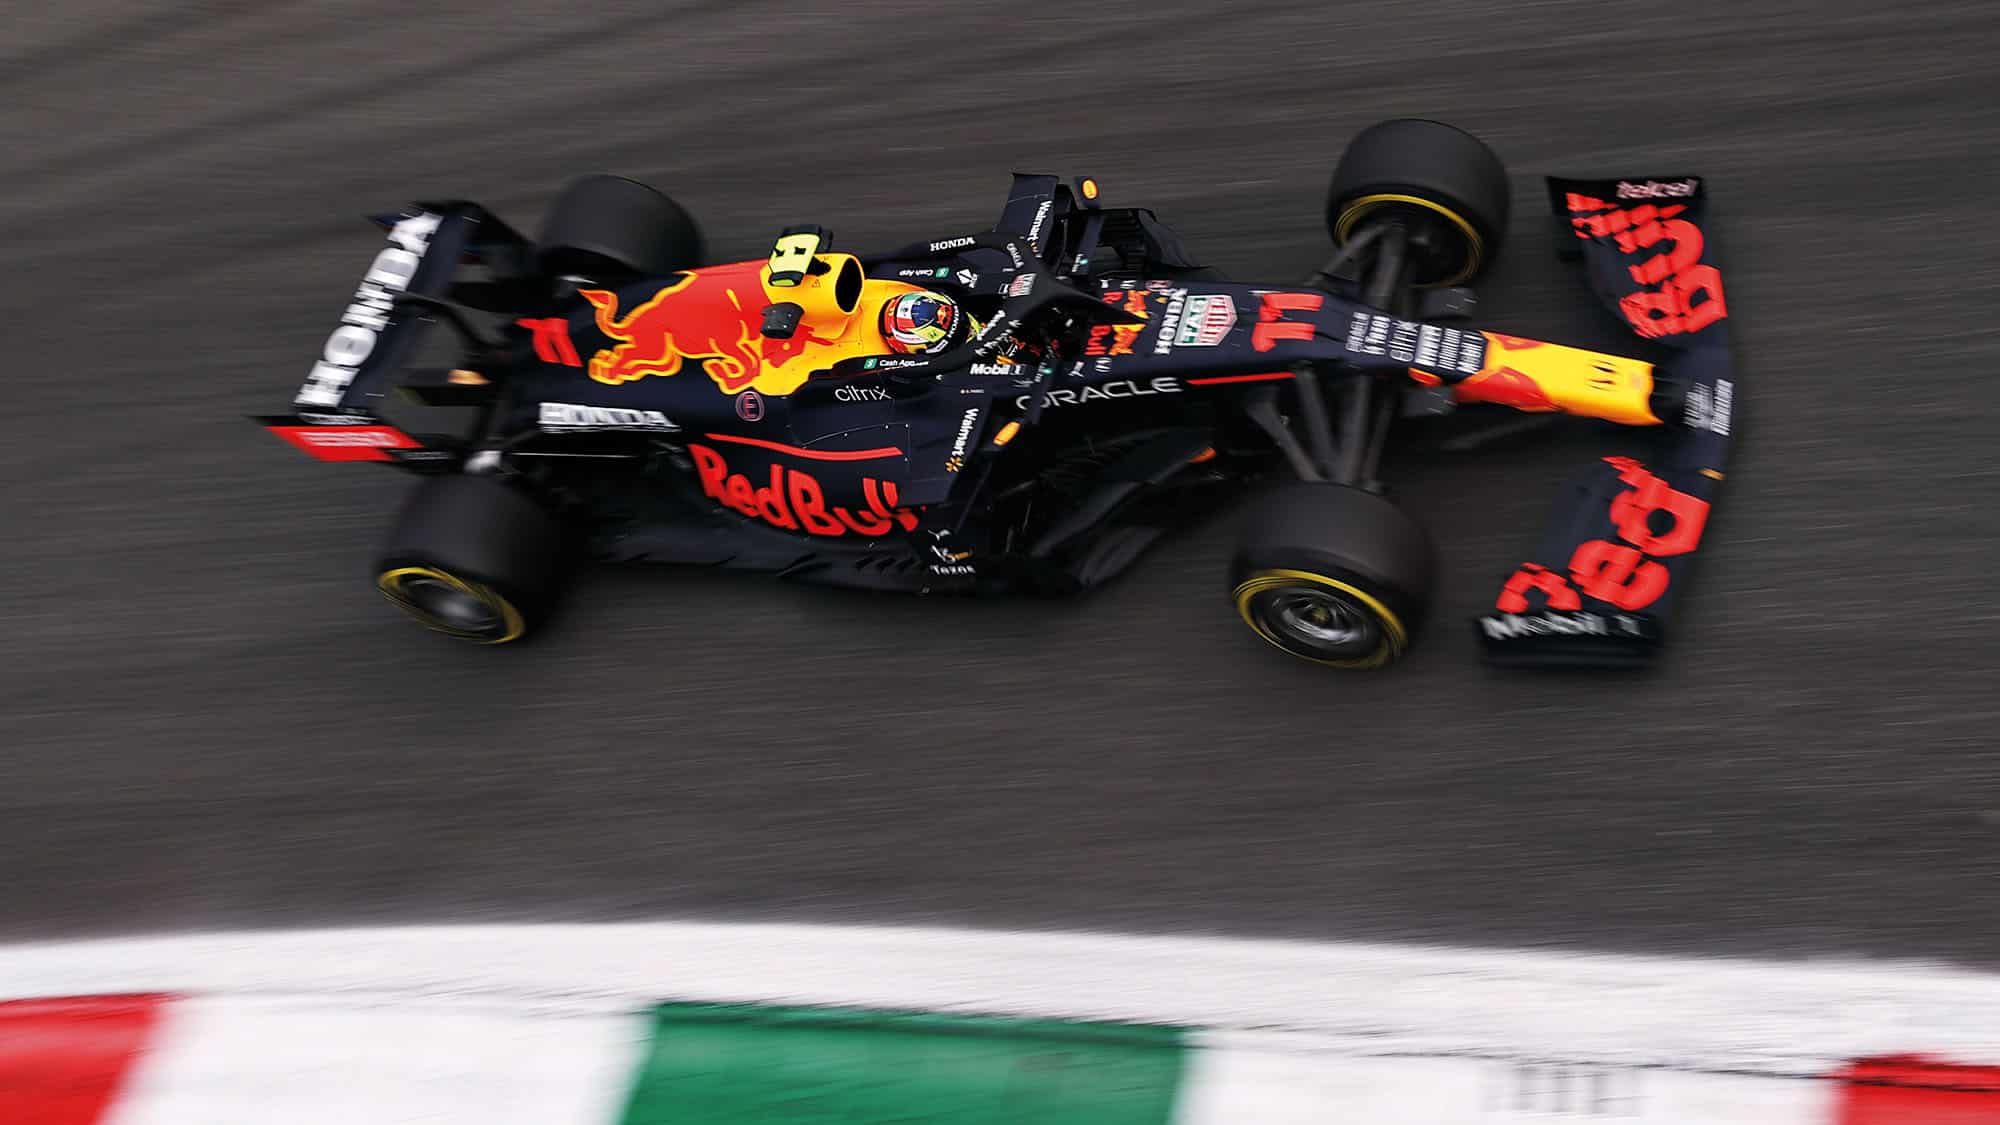 F1 News: V-CARB Announces Huge New Recruits From Red Bull, Alpine